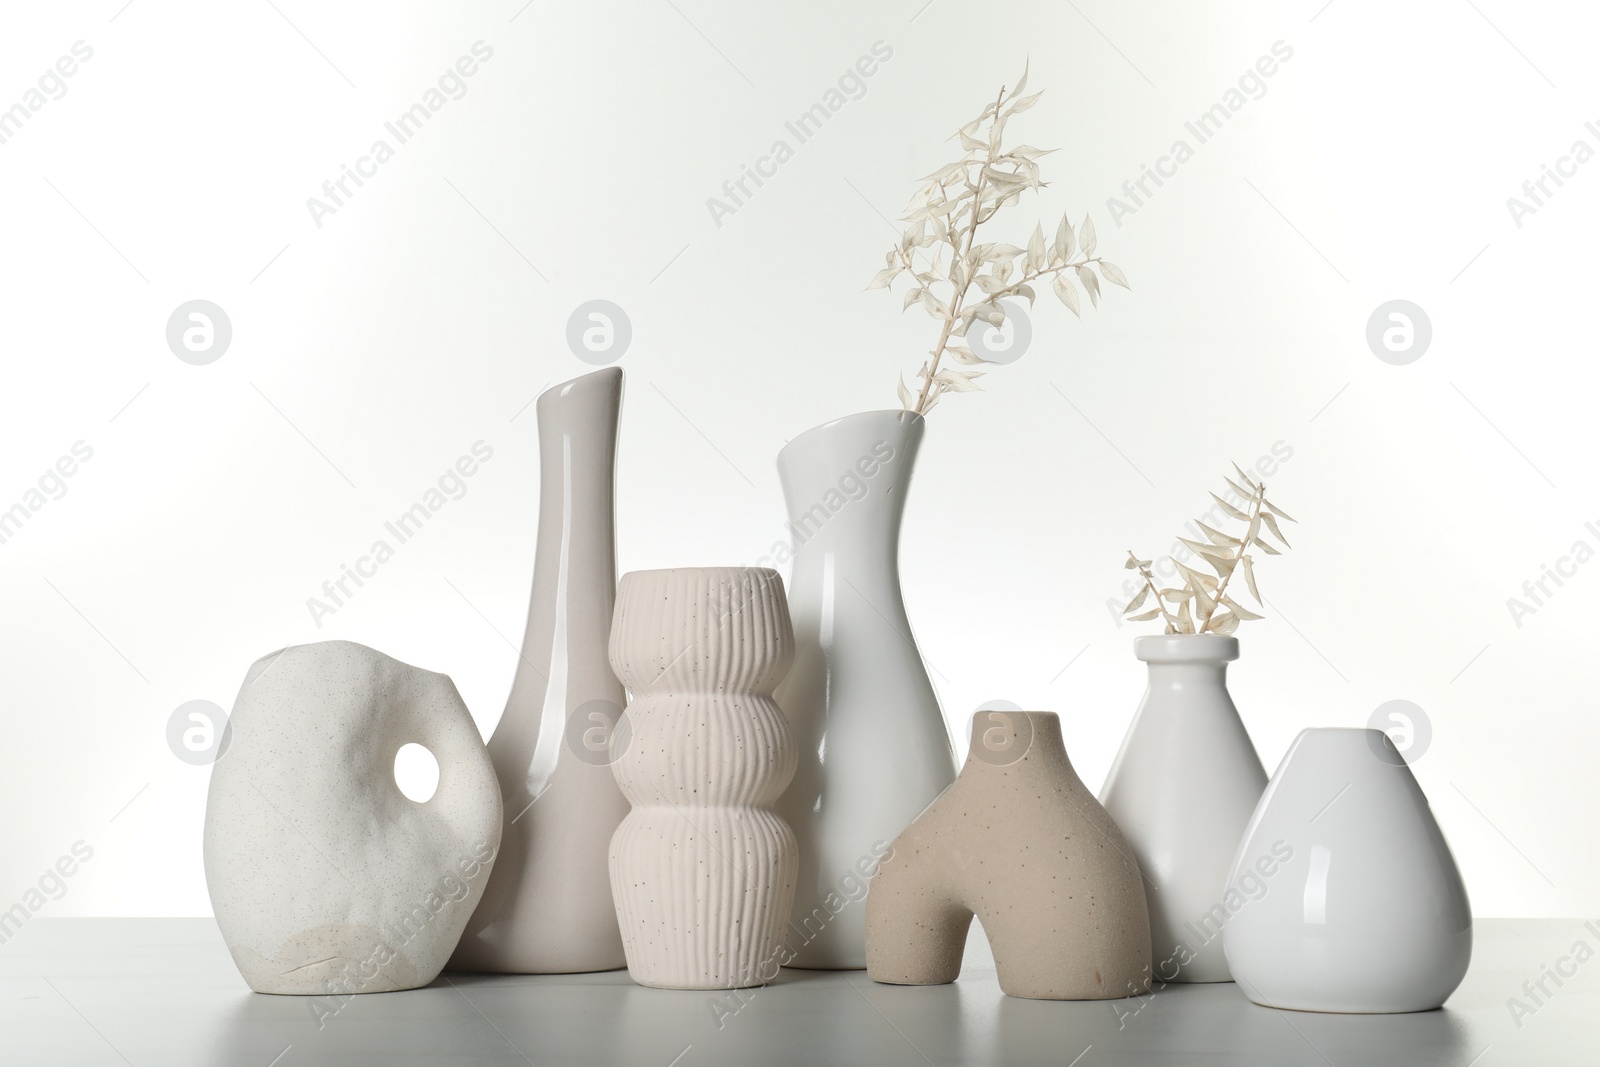 Photo of Different stylish vases and dried flowers on light table against white background